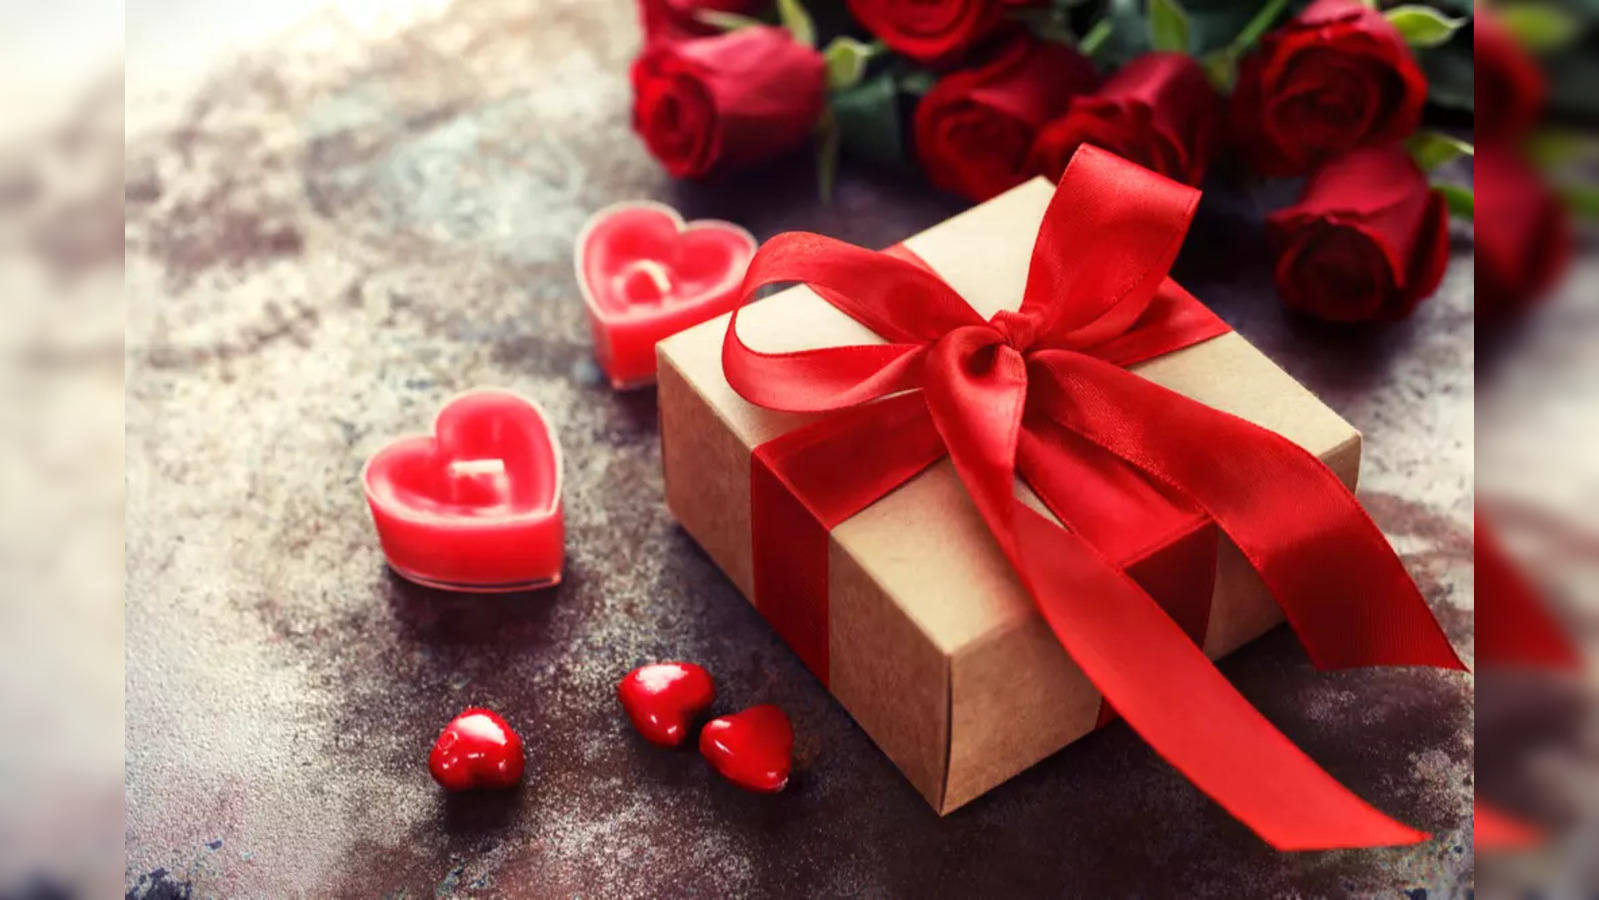 Valentines day gifts for him: Gift ideas for boyfriend - 40 thoughtful gifts  for Valentine's Day 2024 to show love to him - The Economic Times